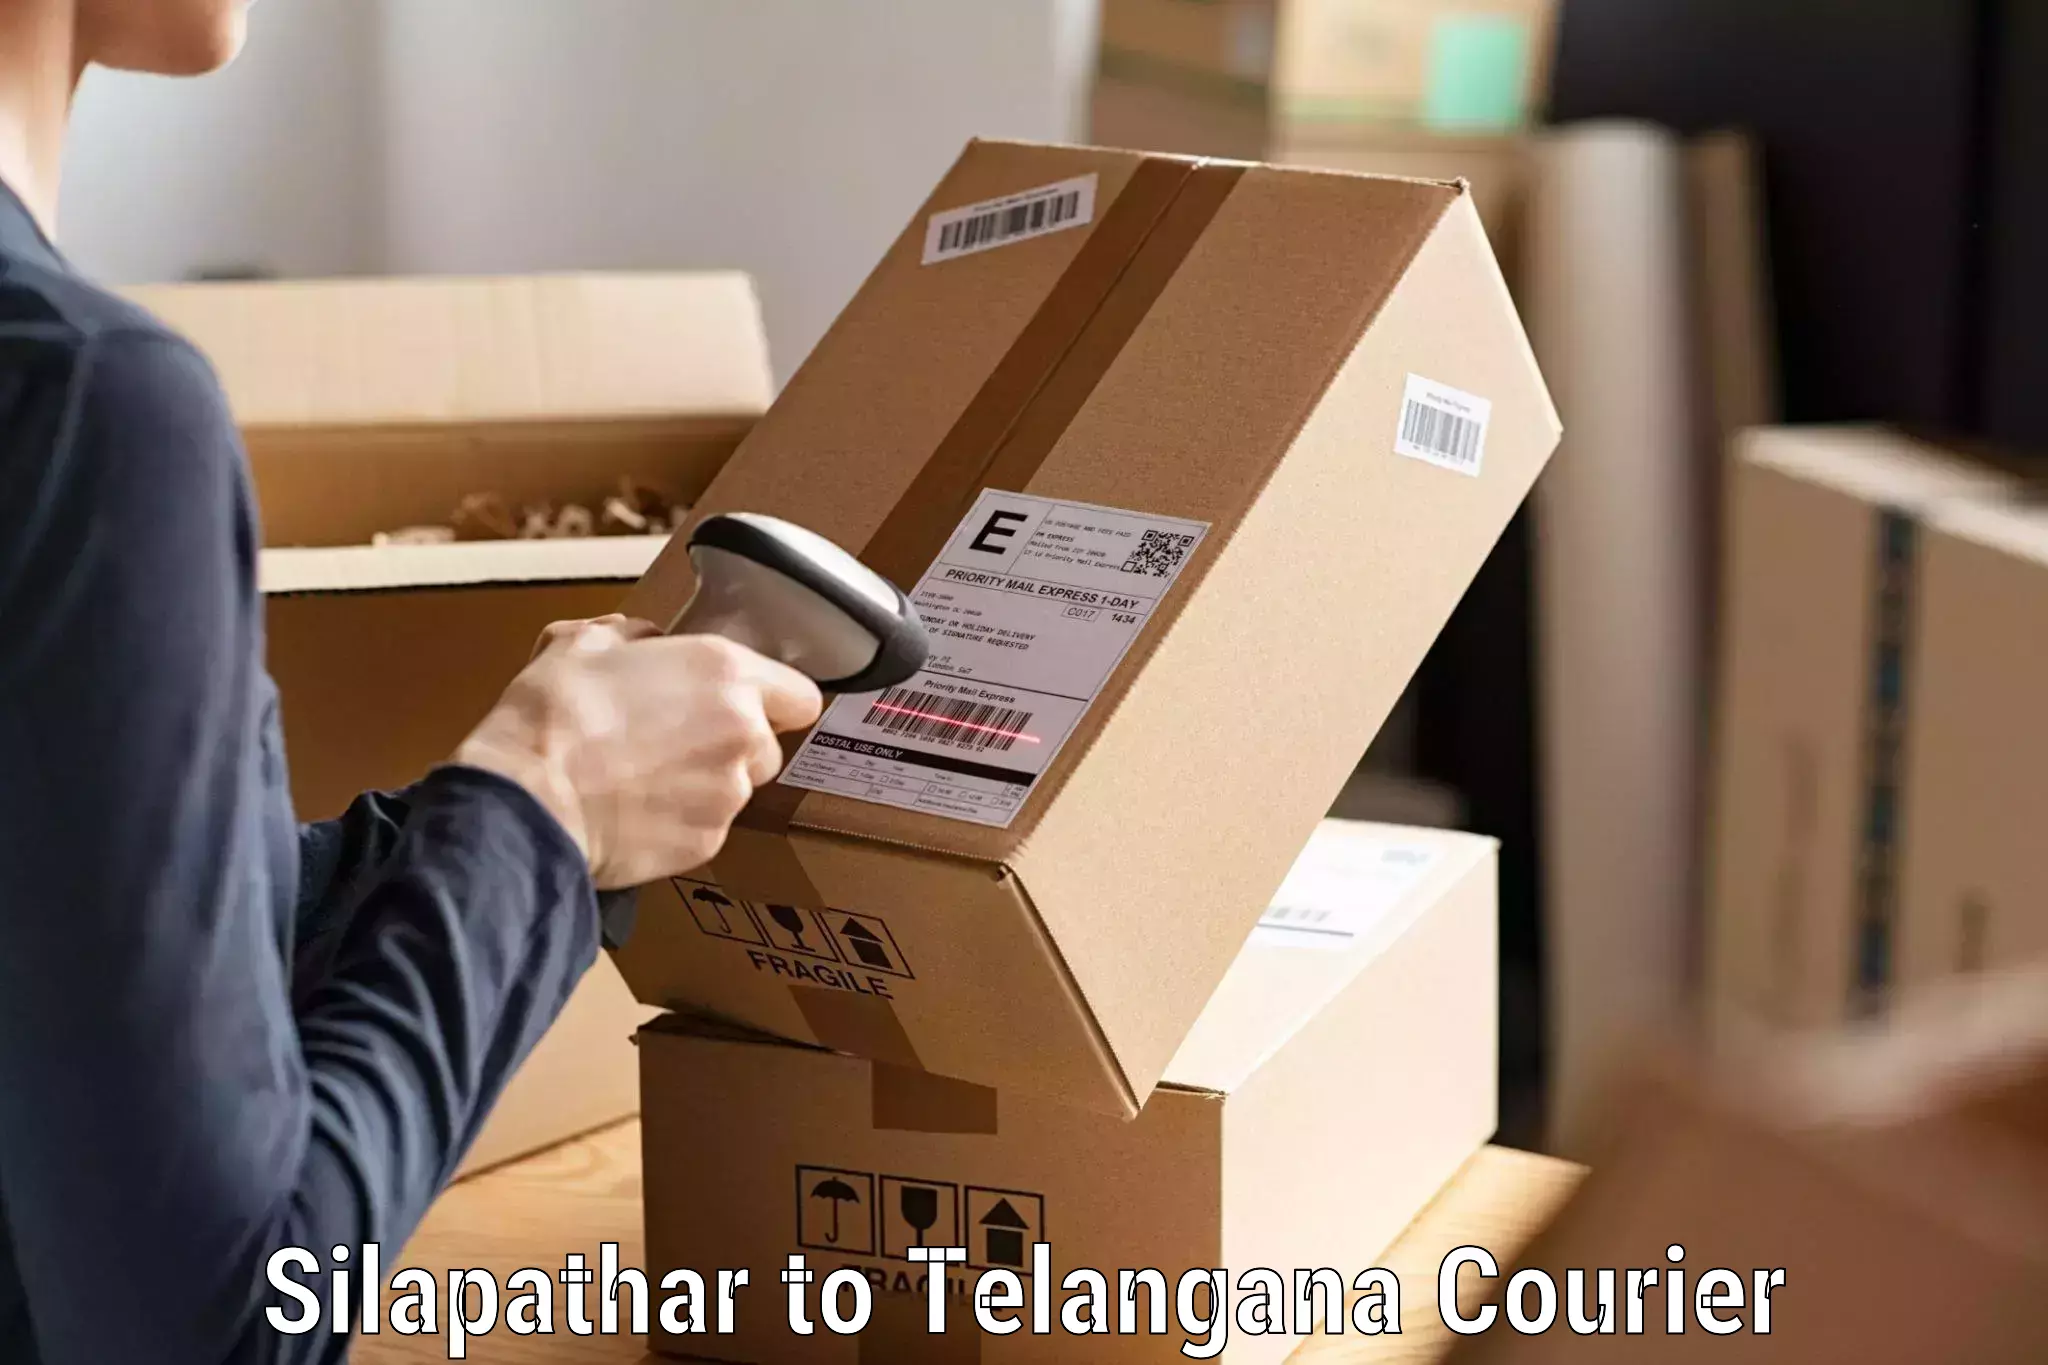 Express logistics providers Silapathar to Medchal